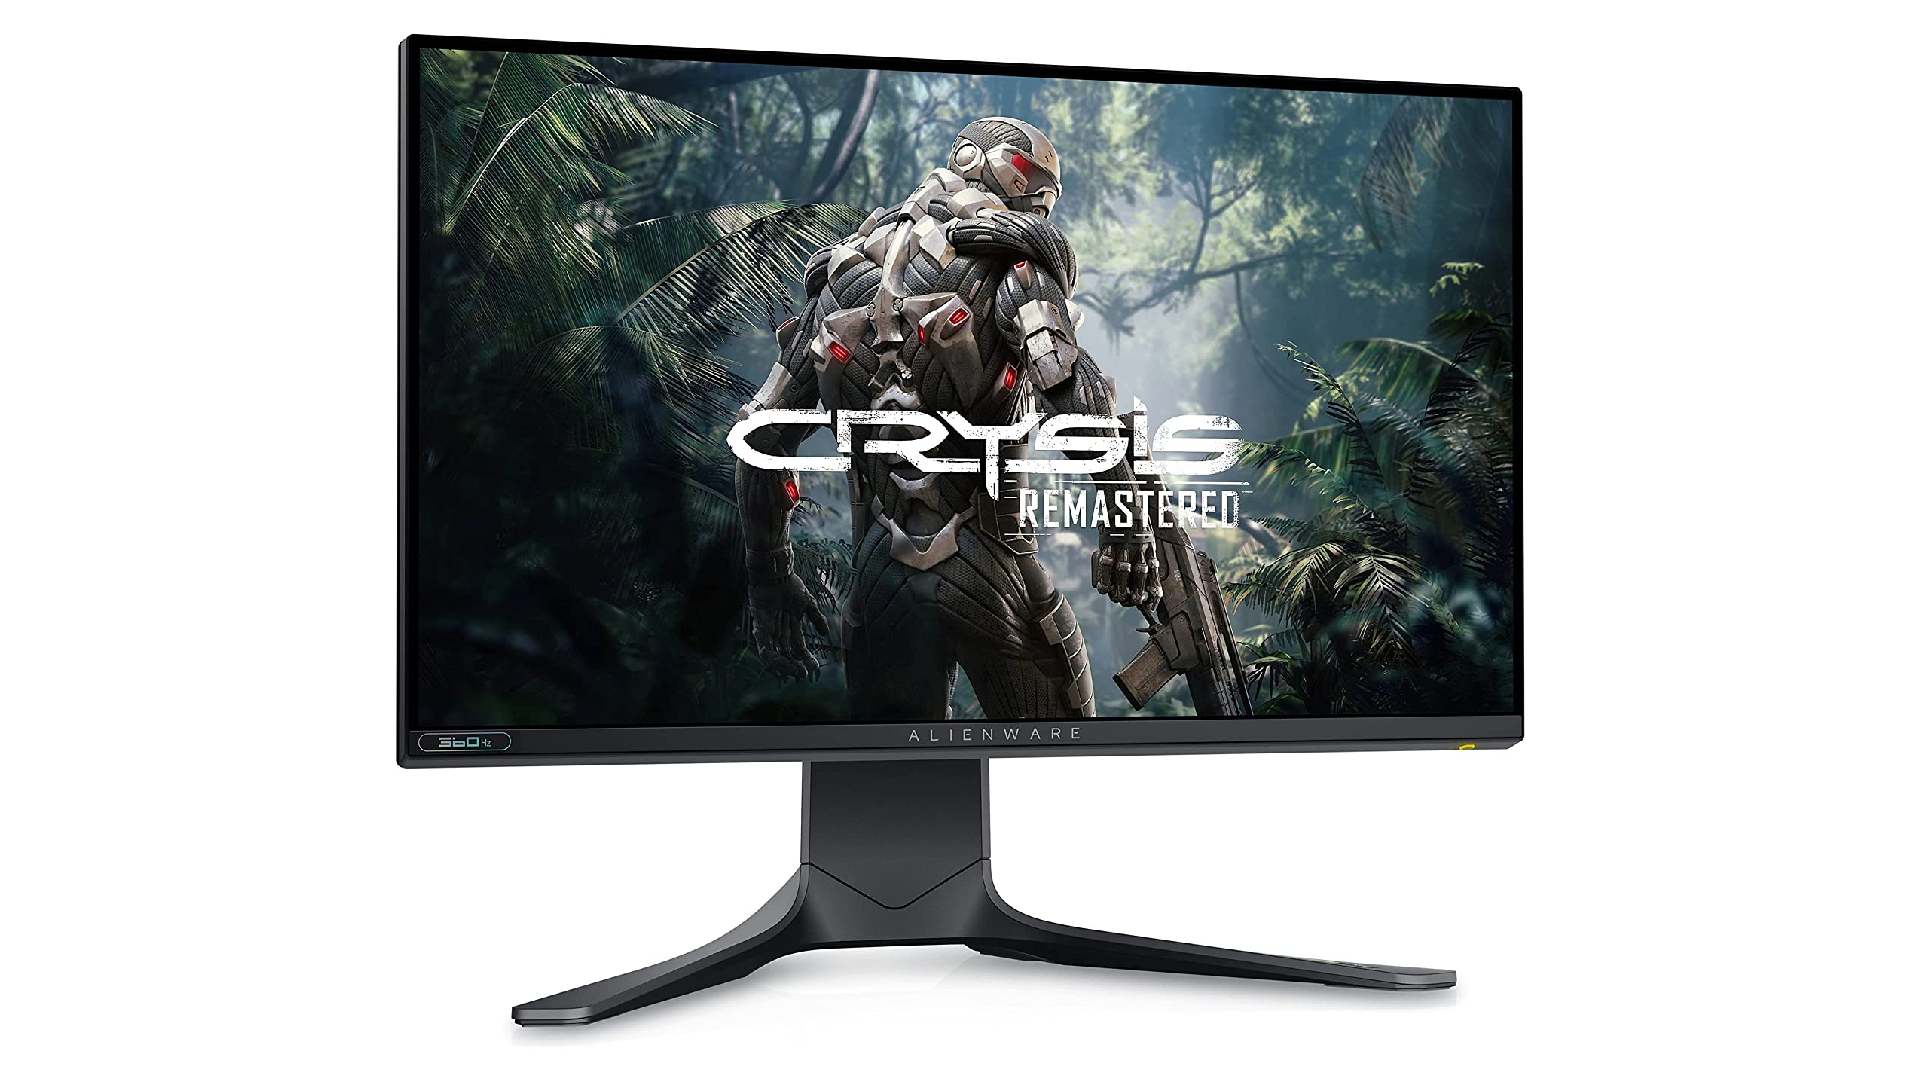 Grab 41% off this 360Hz Alienware gaming monitor